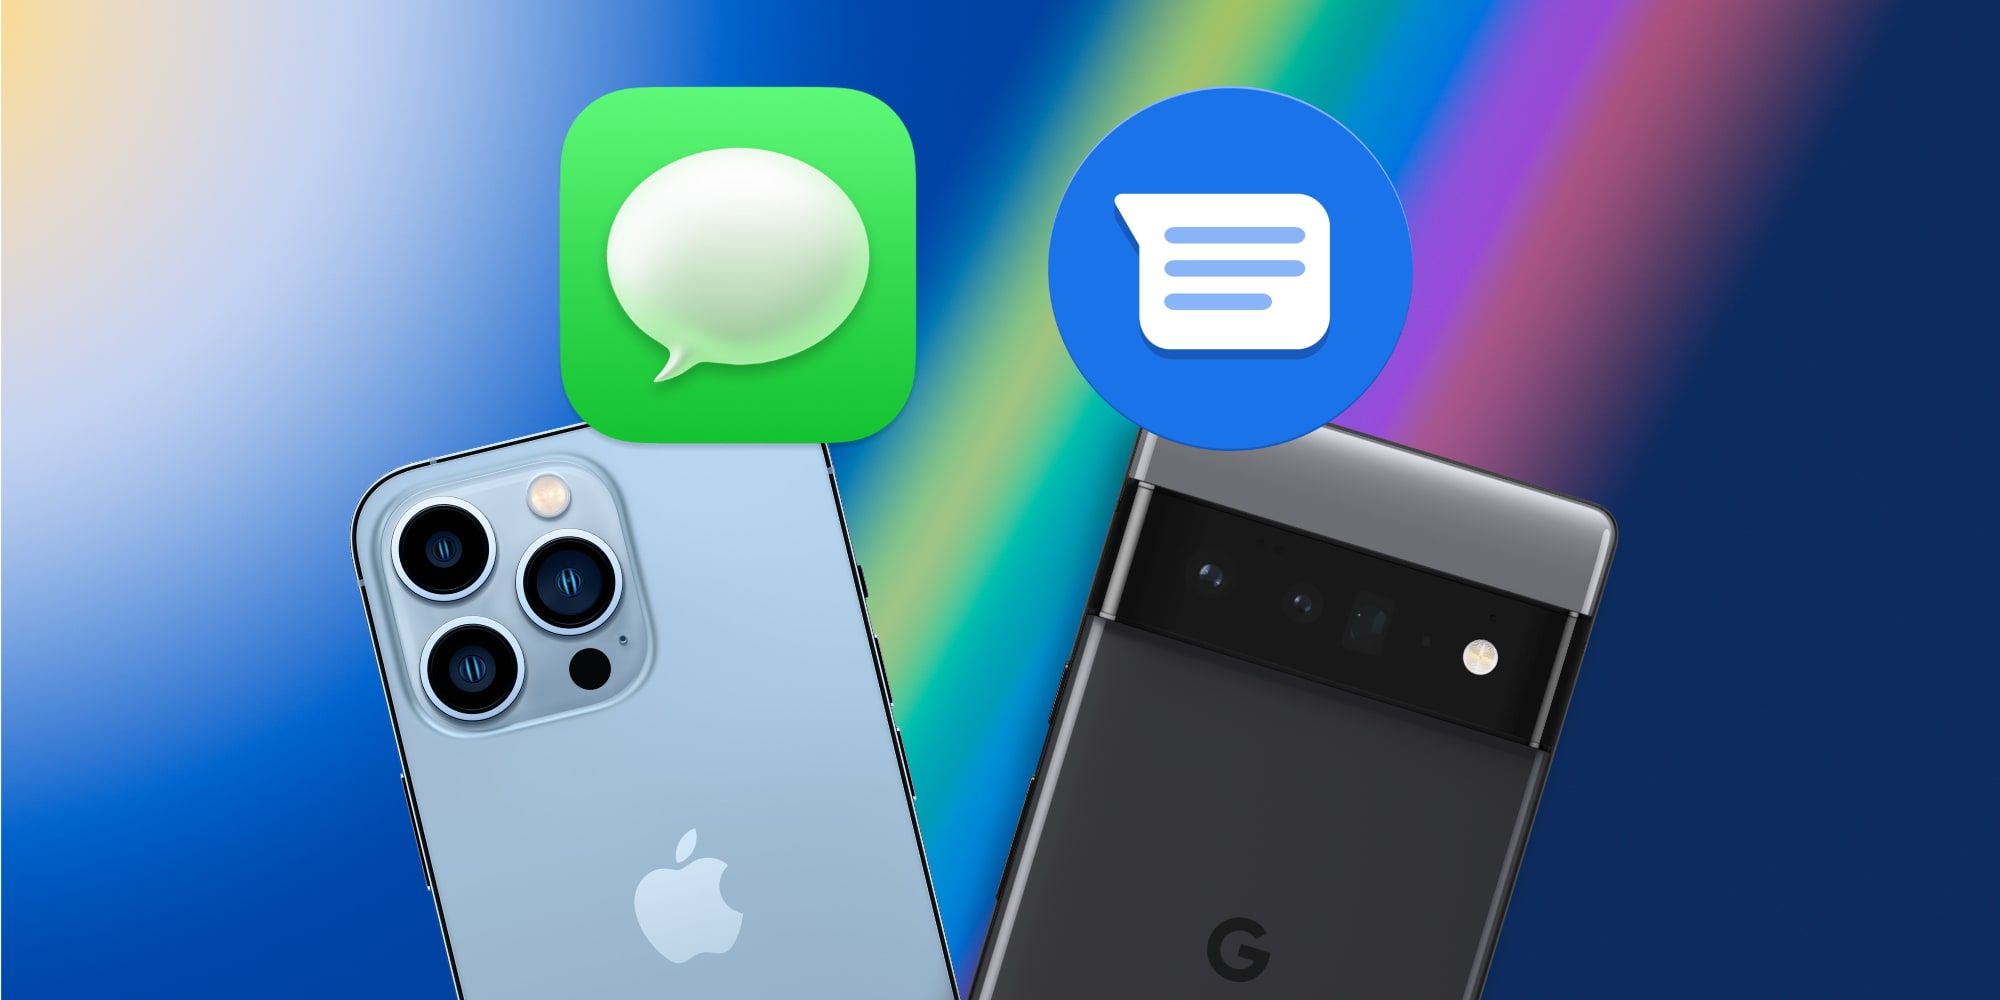 Apple iPhone iMessages Google Pixel Android Messages With Rainbow